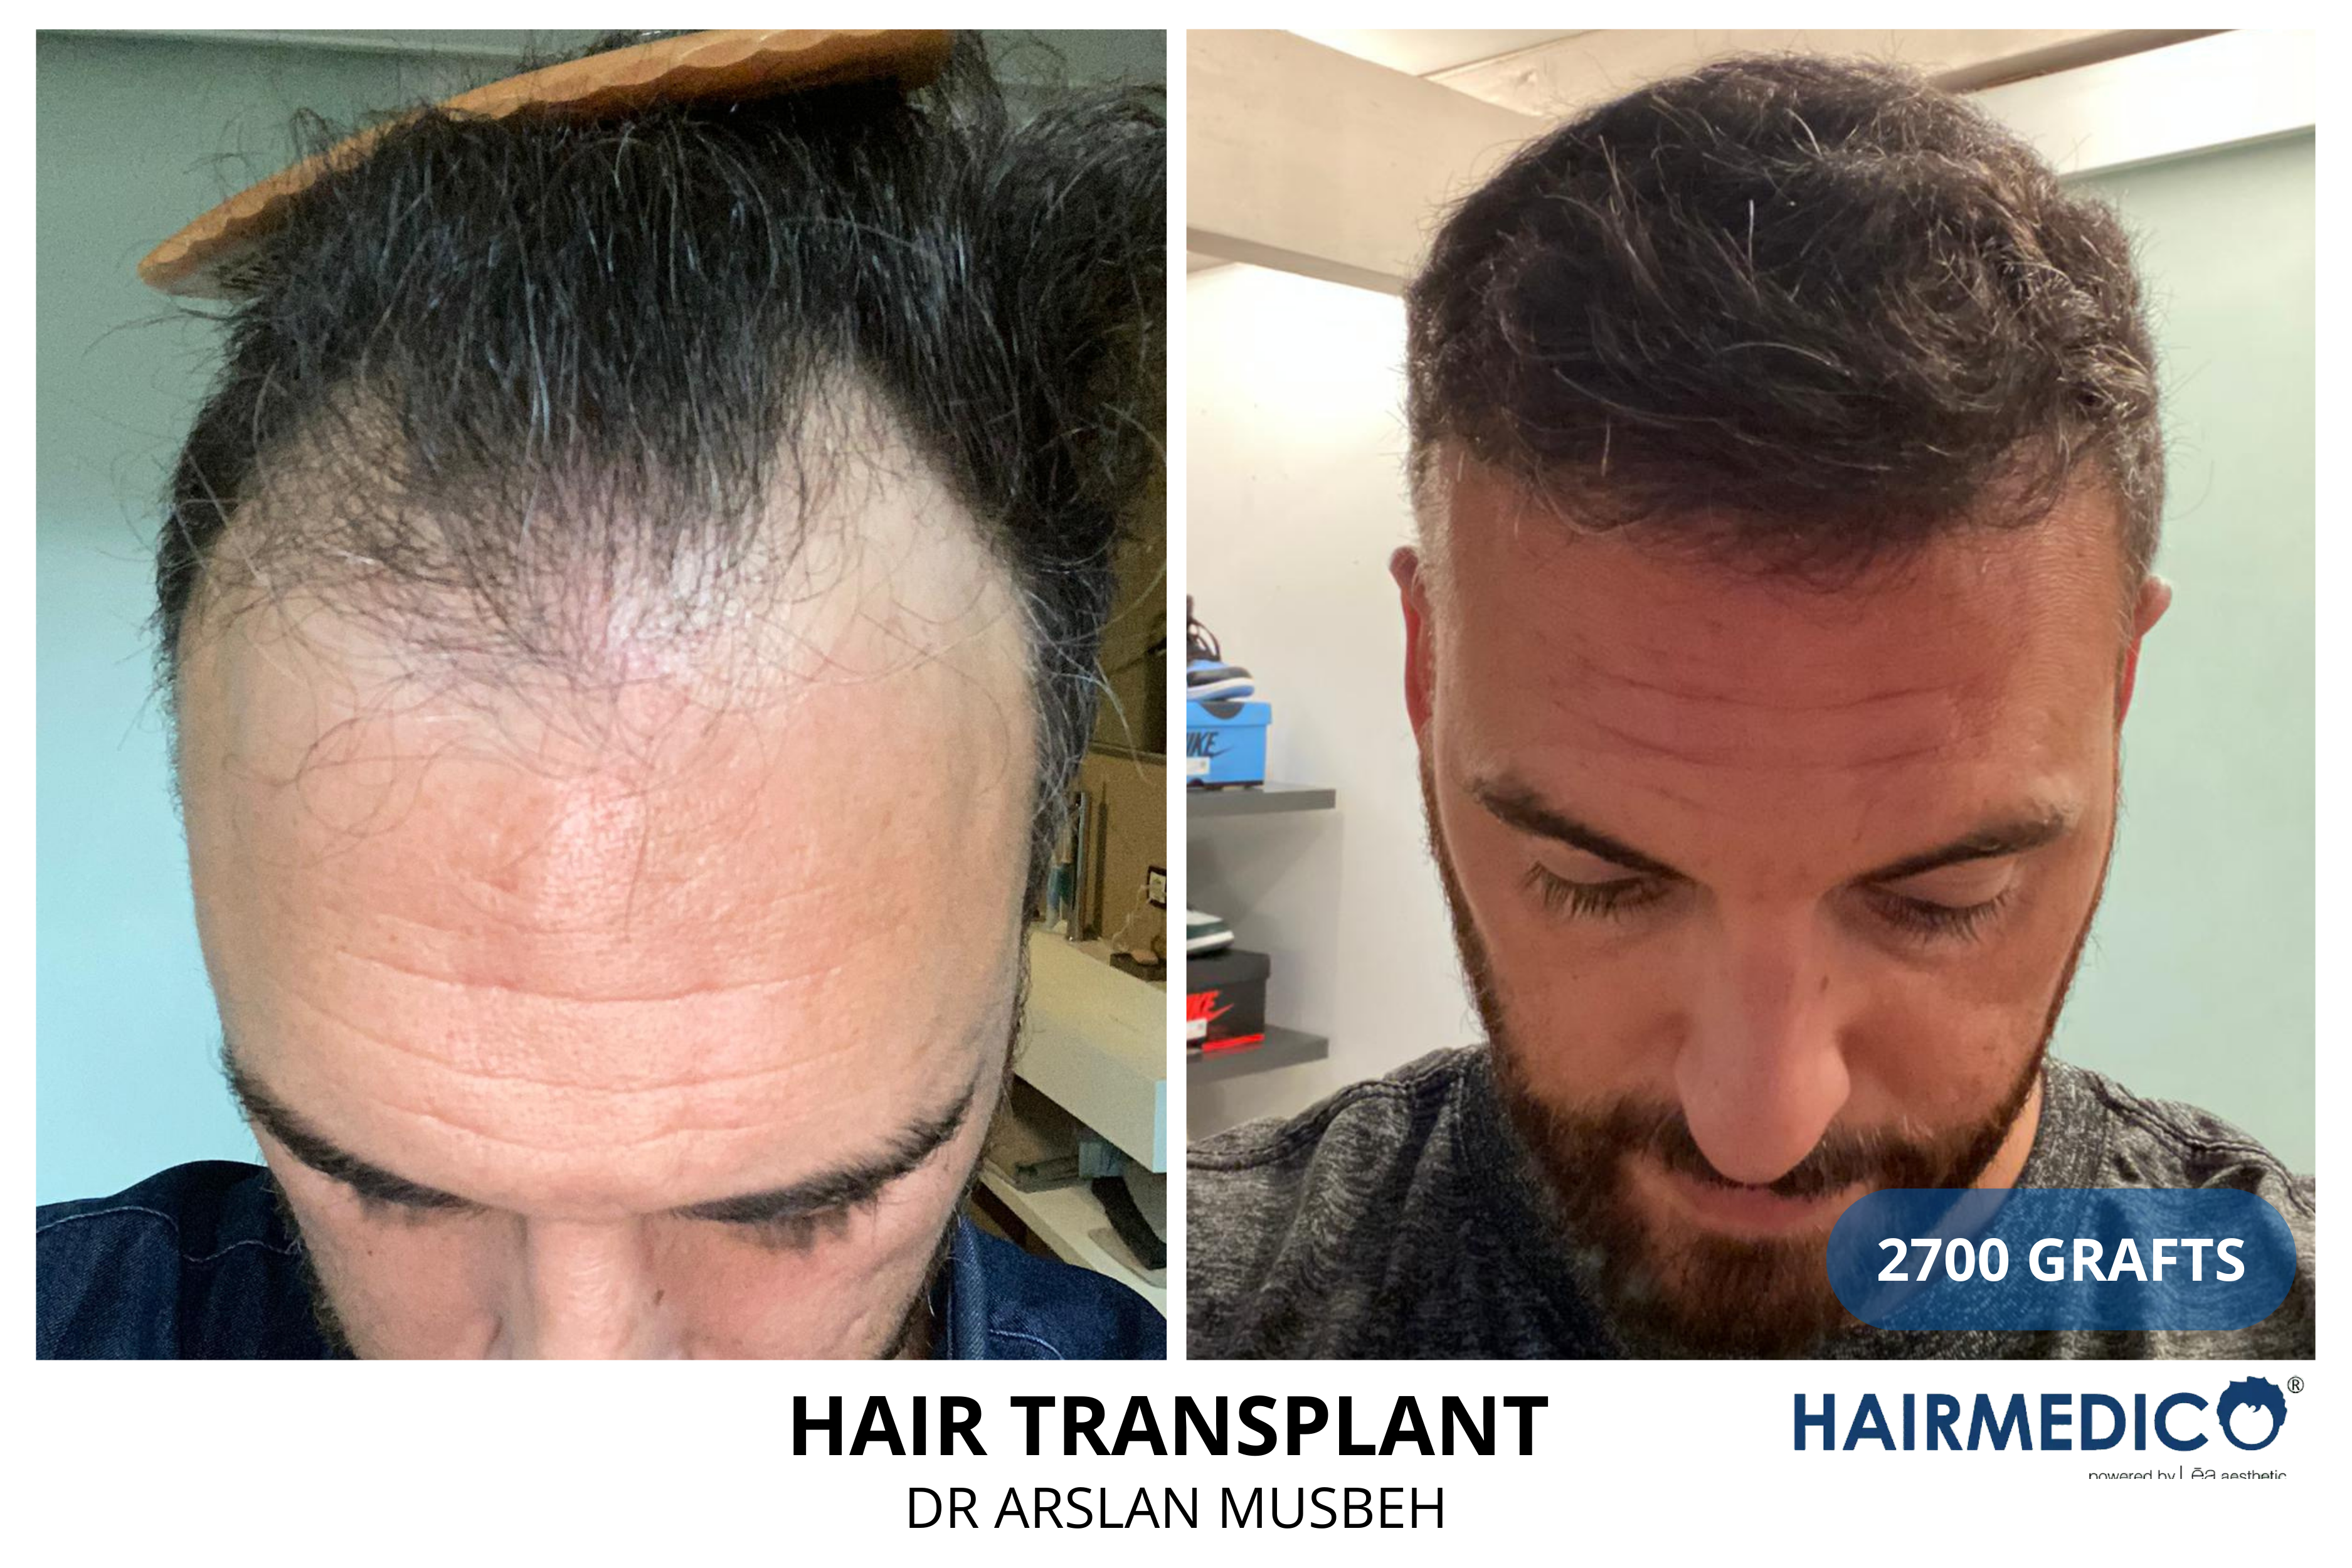 Afro hair transplant,before and after hair transplant